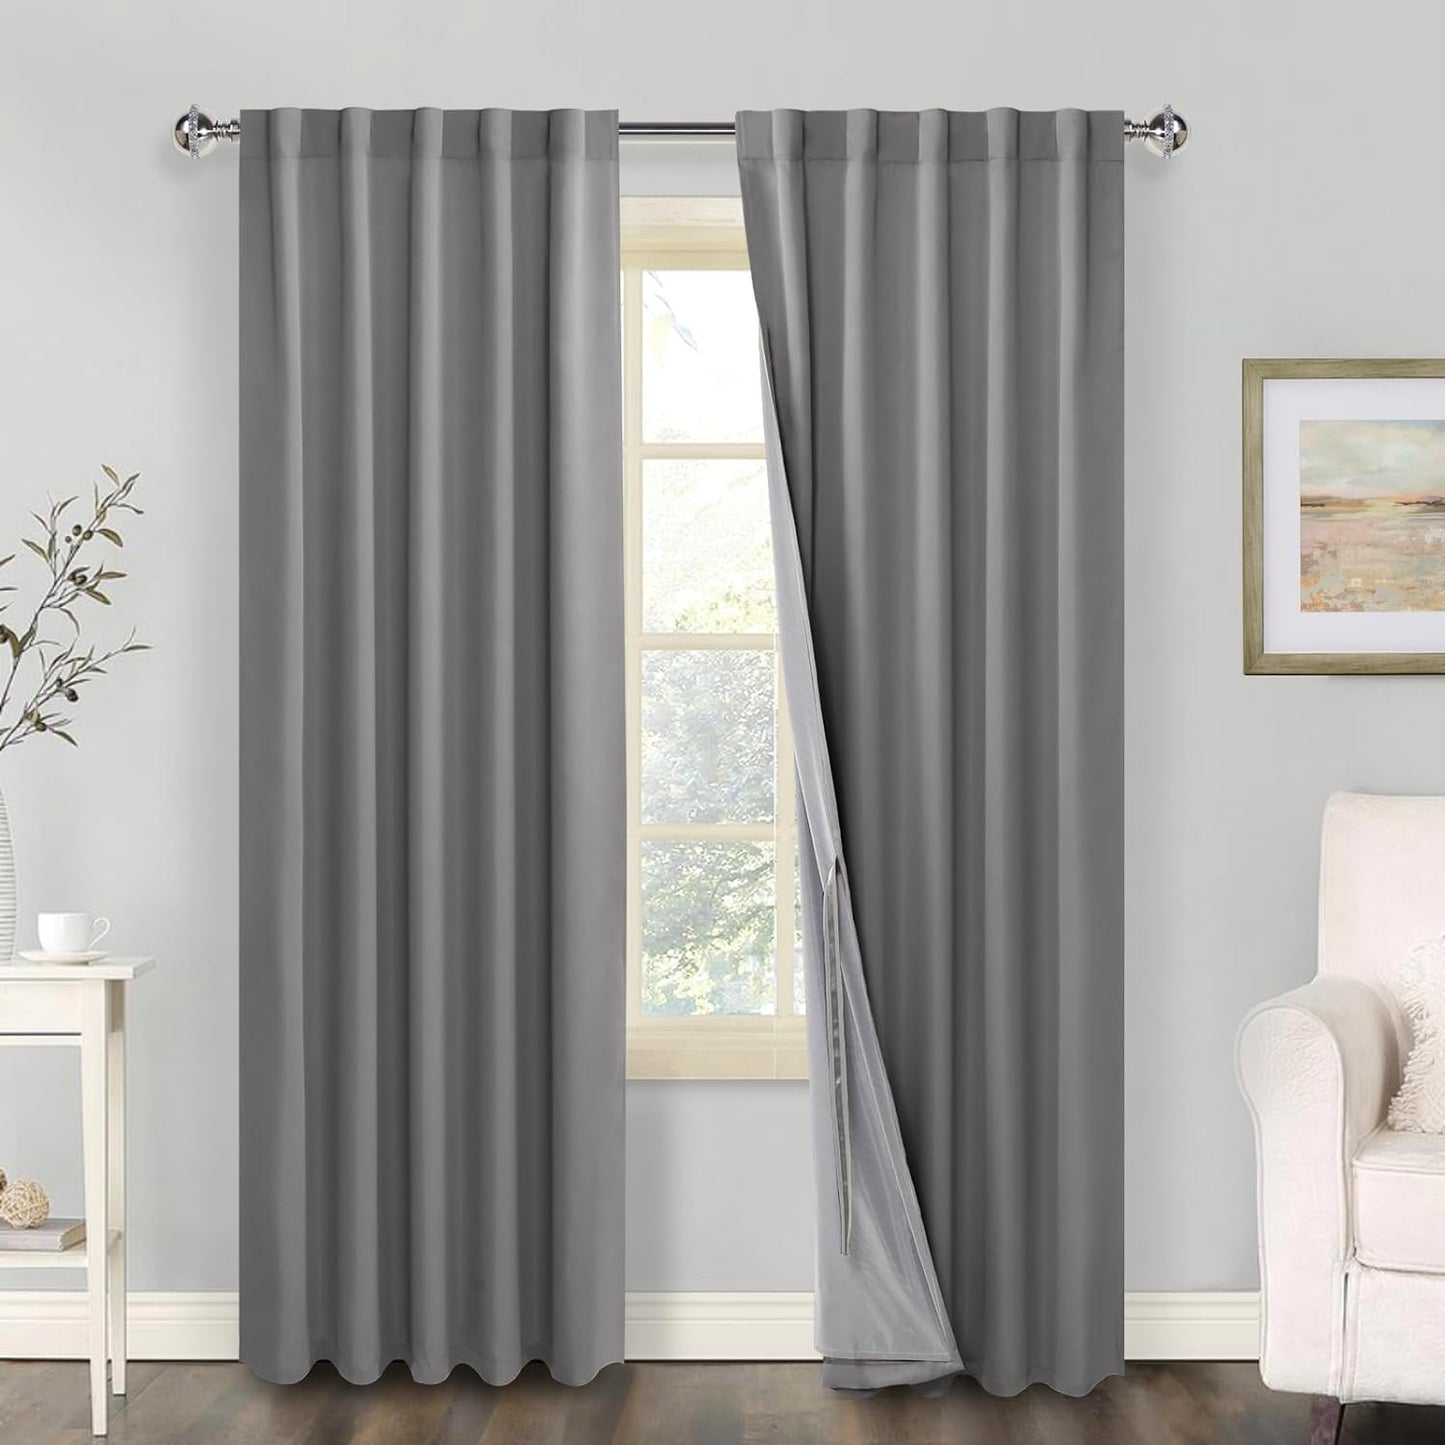 100% Blackout Curtains 2 Panels with Tiebacks- Heat and Full Light Blocking Window Treatment with Black Liner for Bedroom/Nursery, Rod Pocket & Back Tab，White, W52 X L84 Inches Long, Set of 2  XWZO Light Grey W42" X L84"|2 Panels 